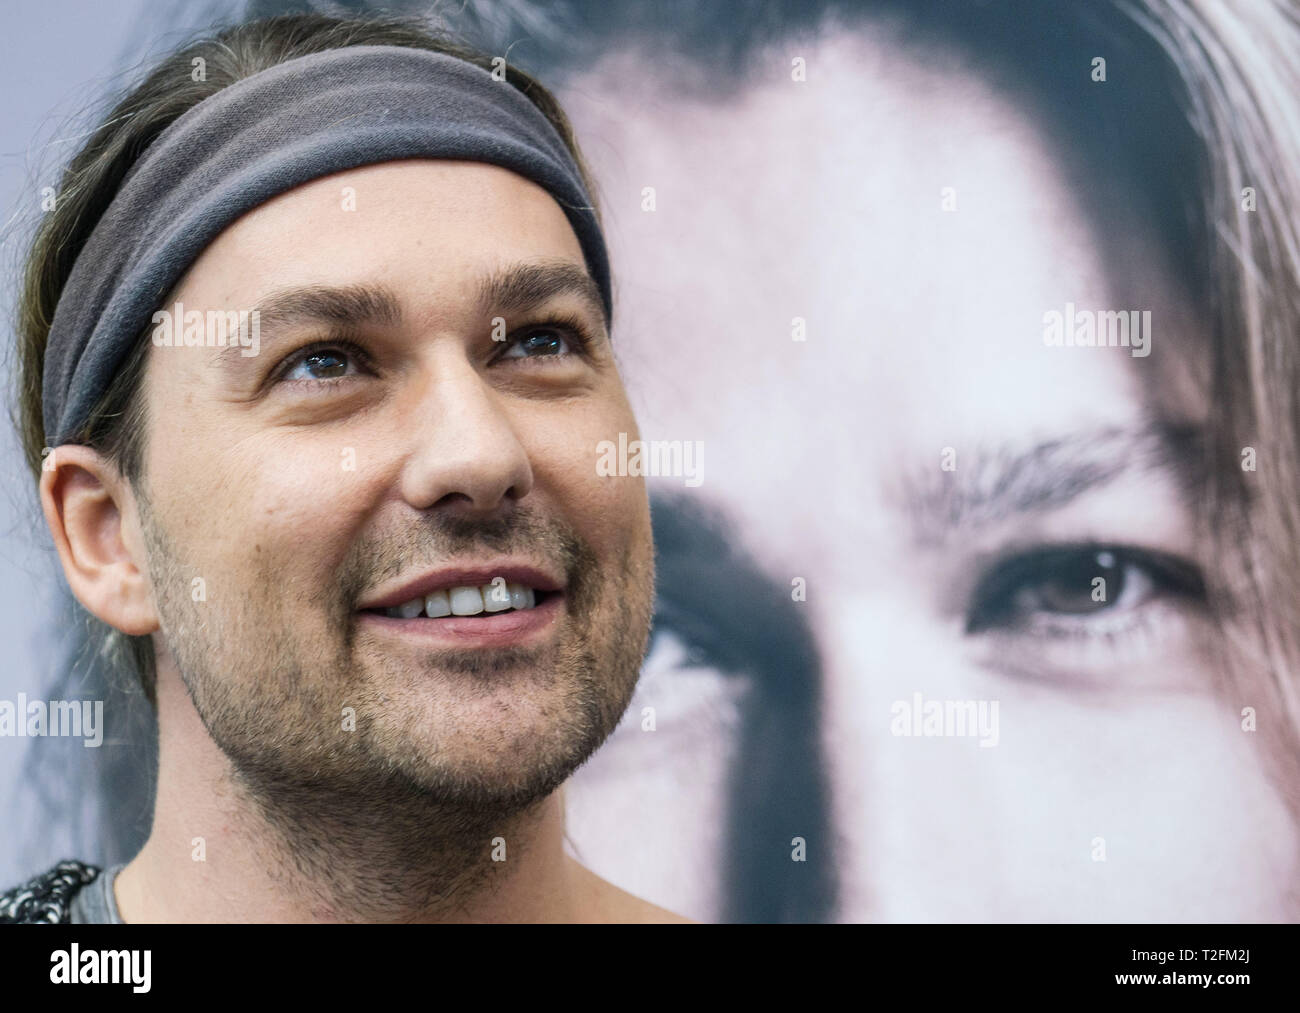 02 April 2019, Hessen, Frankfurt/Main: Star violinist David Garrett will be at the Schott Music stand at the Frankfurt Musikmesse. The publisher publishes the music edition 'David Garrett Best of Violin' with Garrett's songs to play. The international trade fair for musical instruments and sheet music, music production and marketing, the largest industry meeting in Europe, lasts from 02.04. to 06.04.2019. Photo: Frank Rumpenhorst/dpa Stock Photo